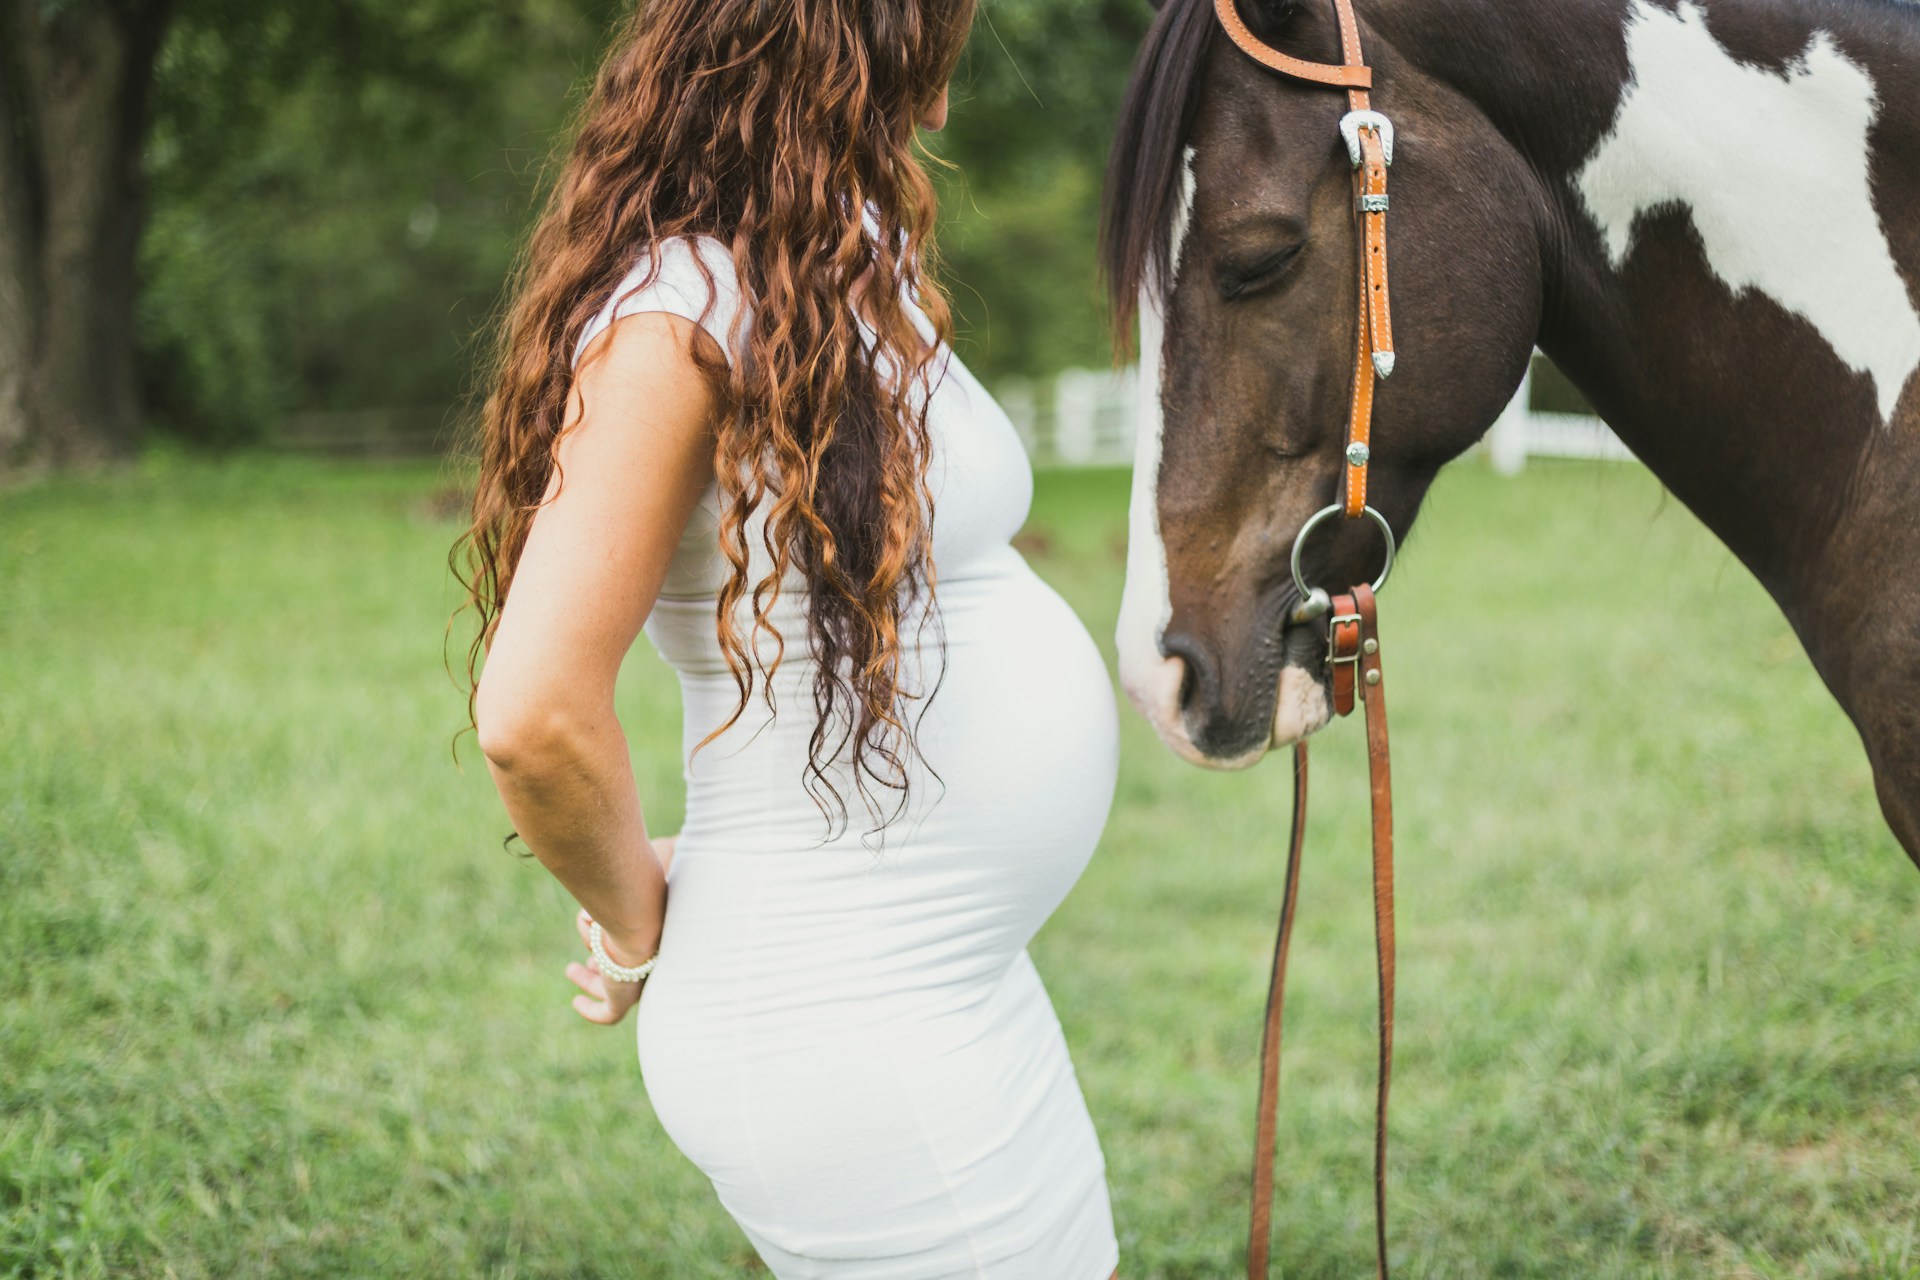 Pregnant woman standing next to a horse